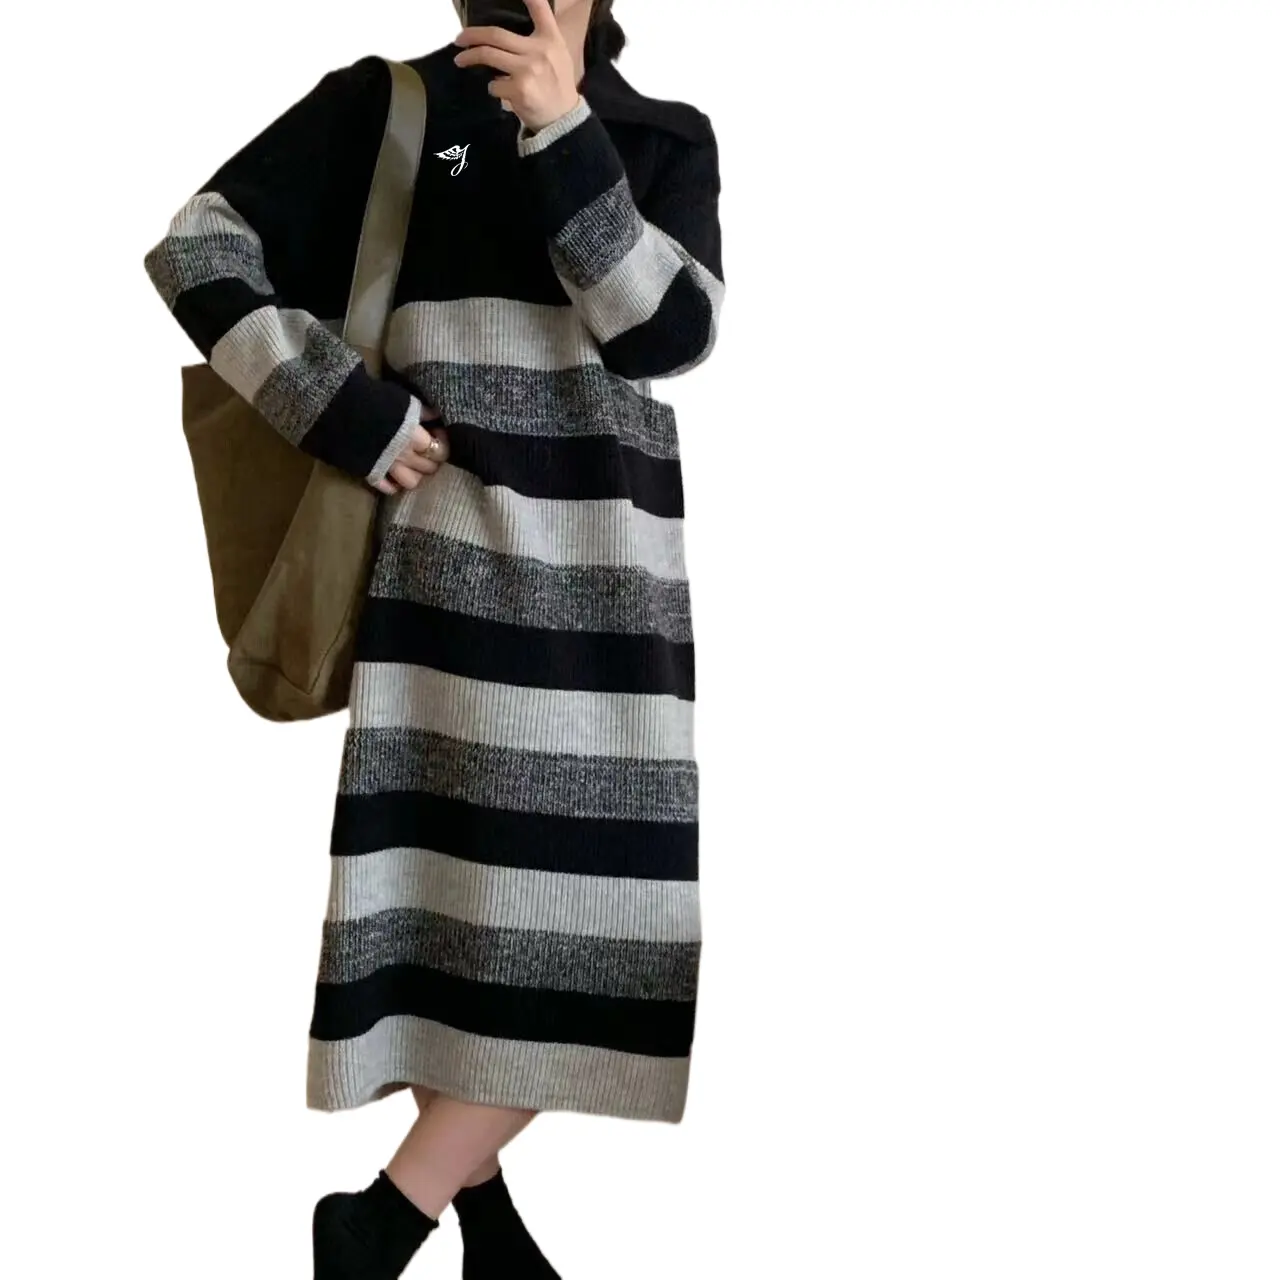 Women dress striped crew neck longer knit sweater autumn black and white knitted dresses for ladies